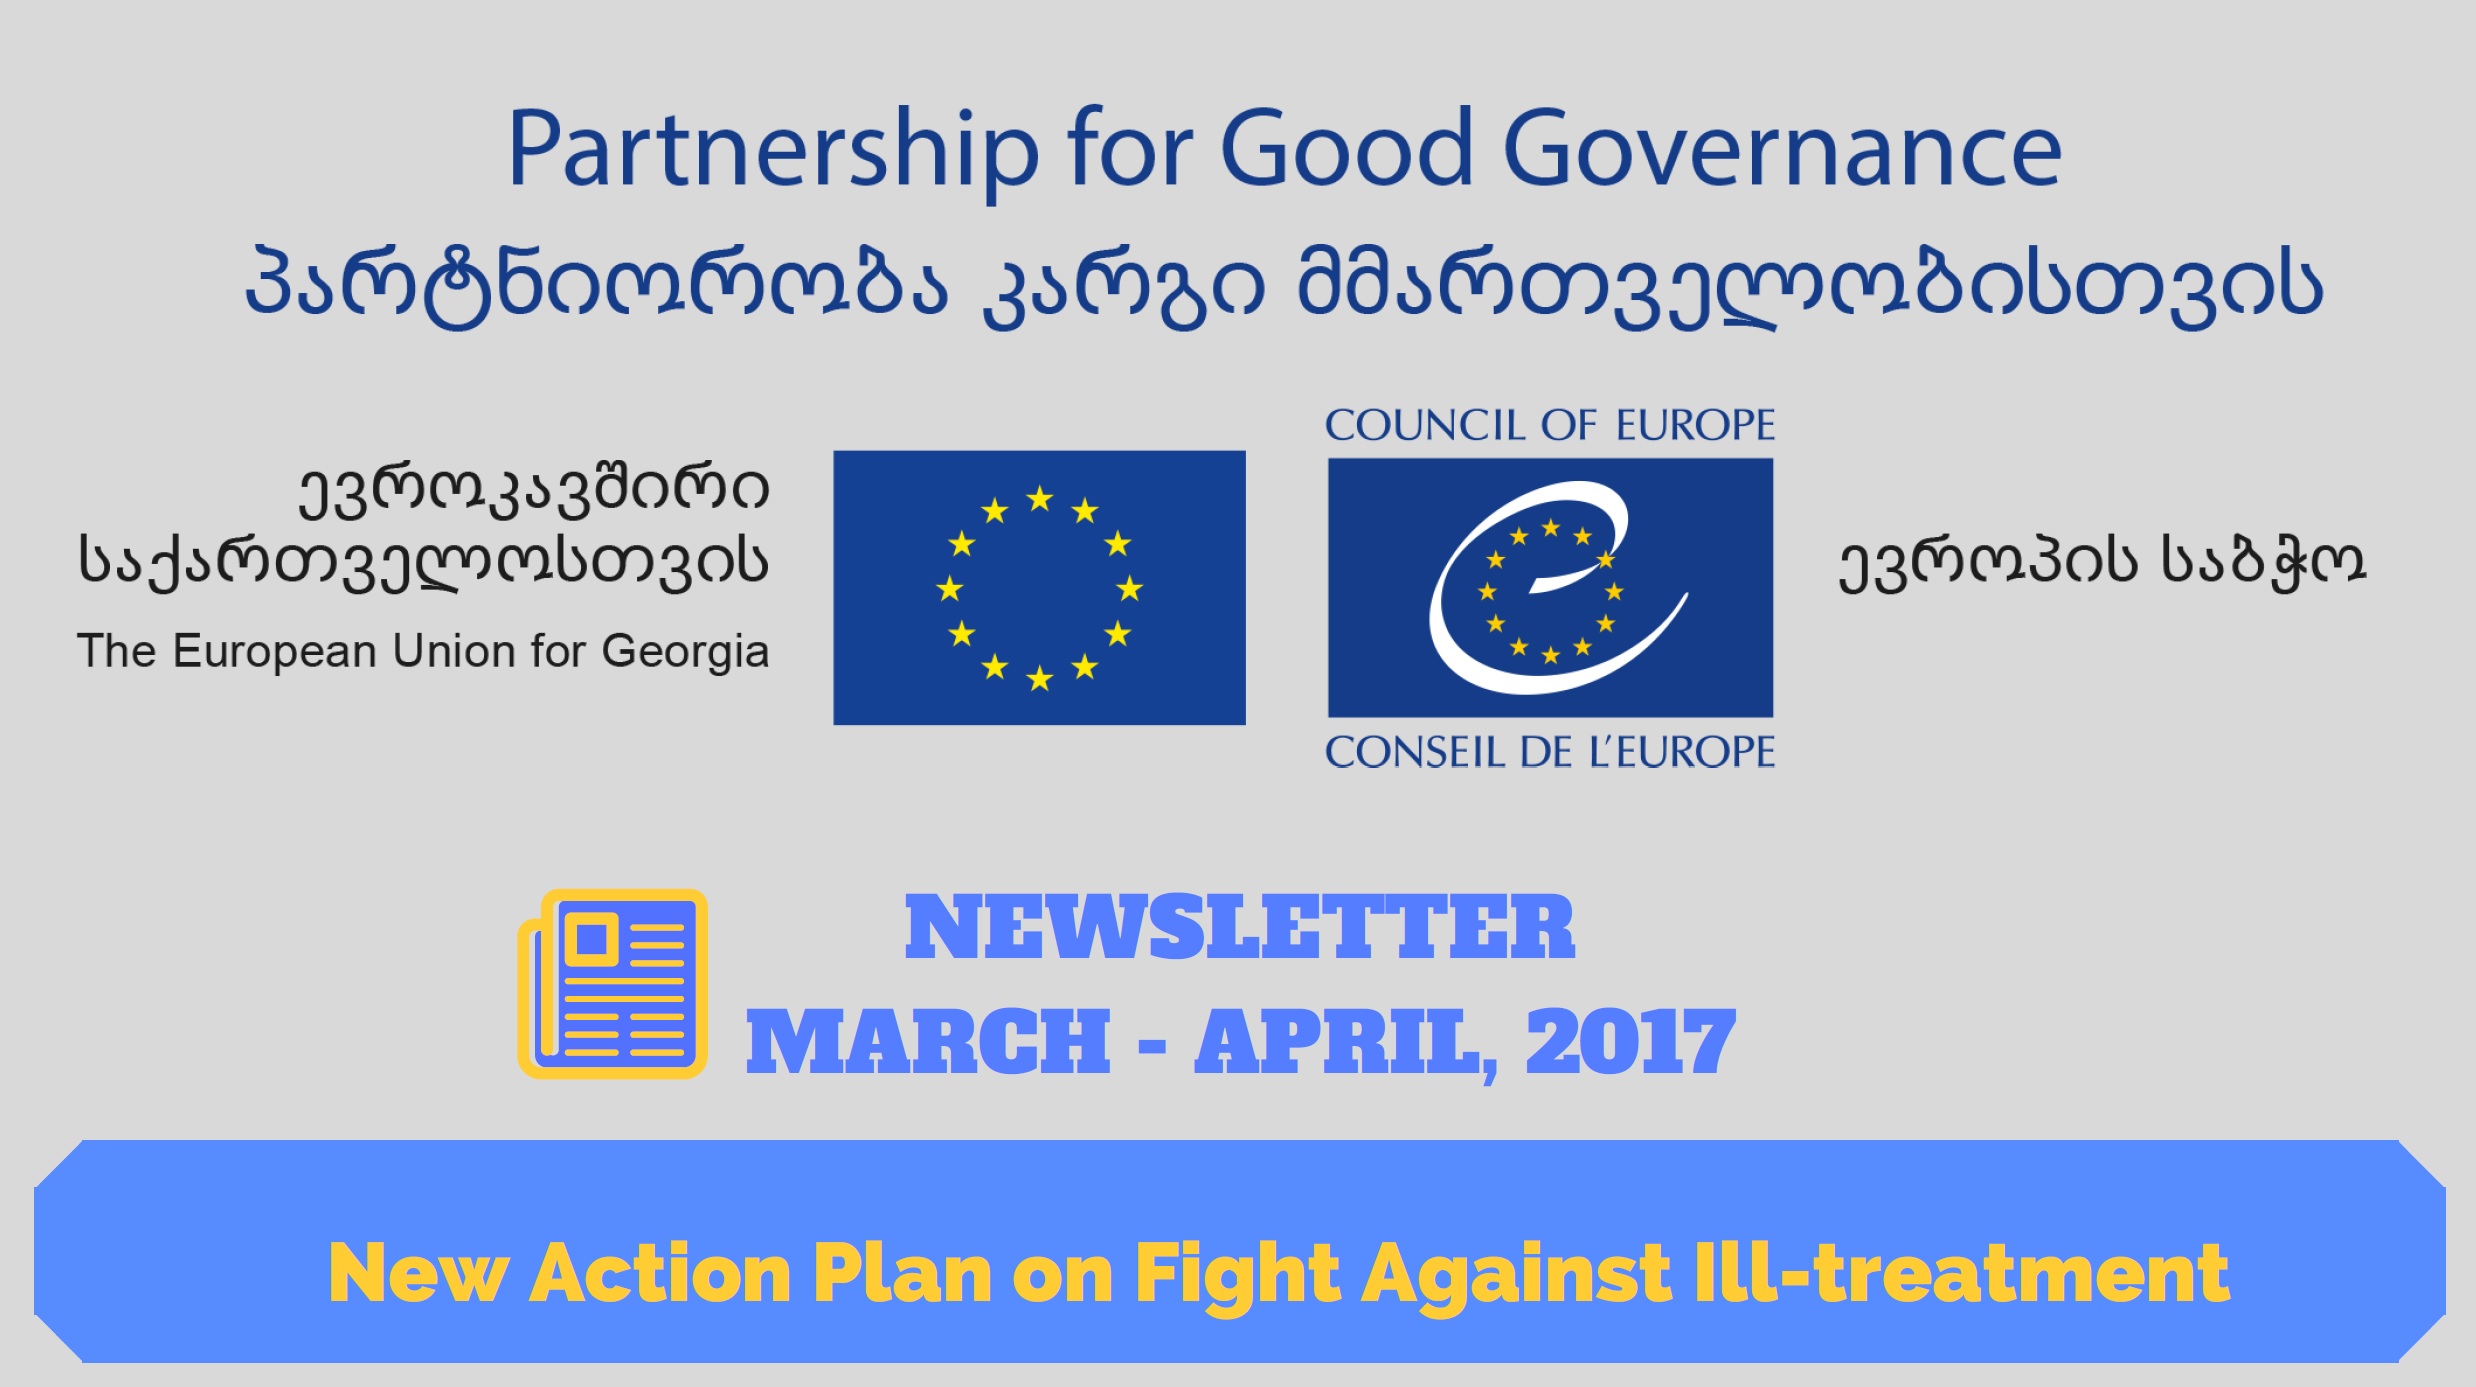 Newsletter - March-April 2017